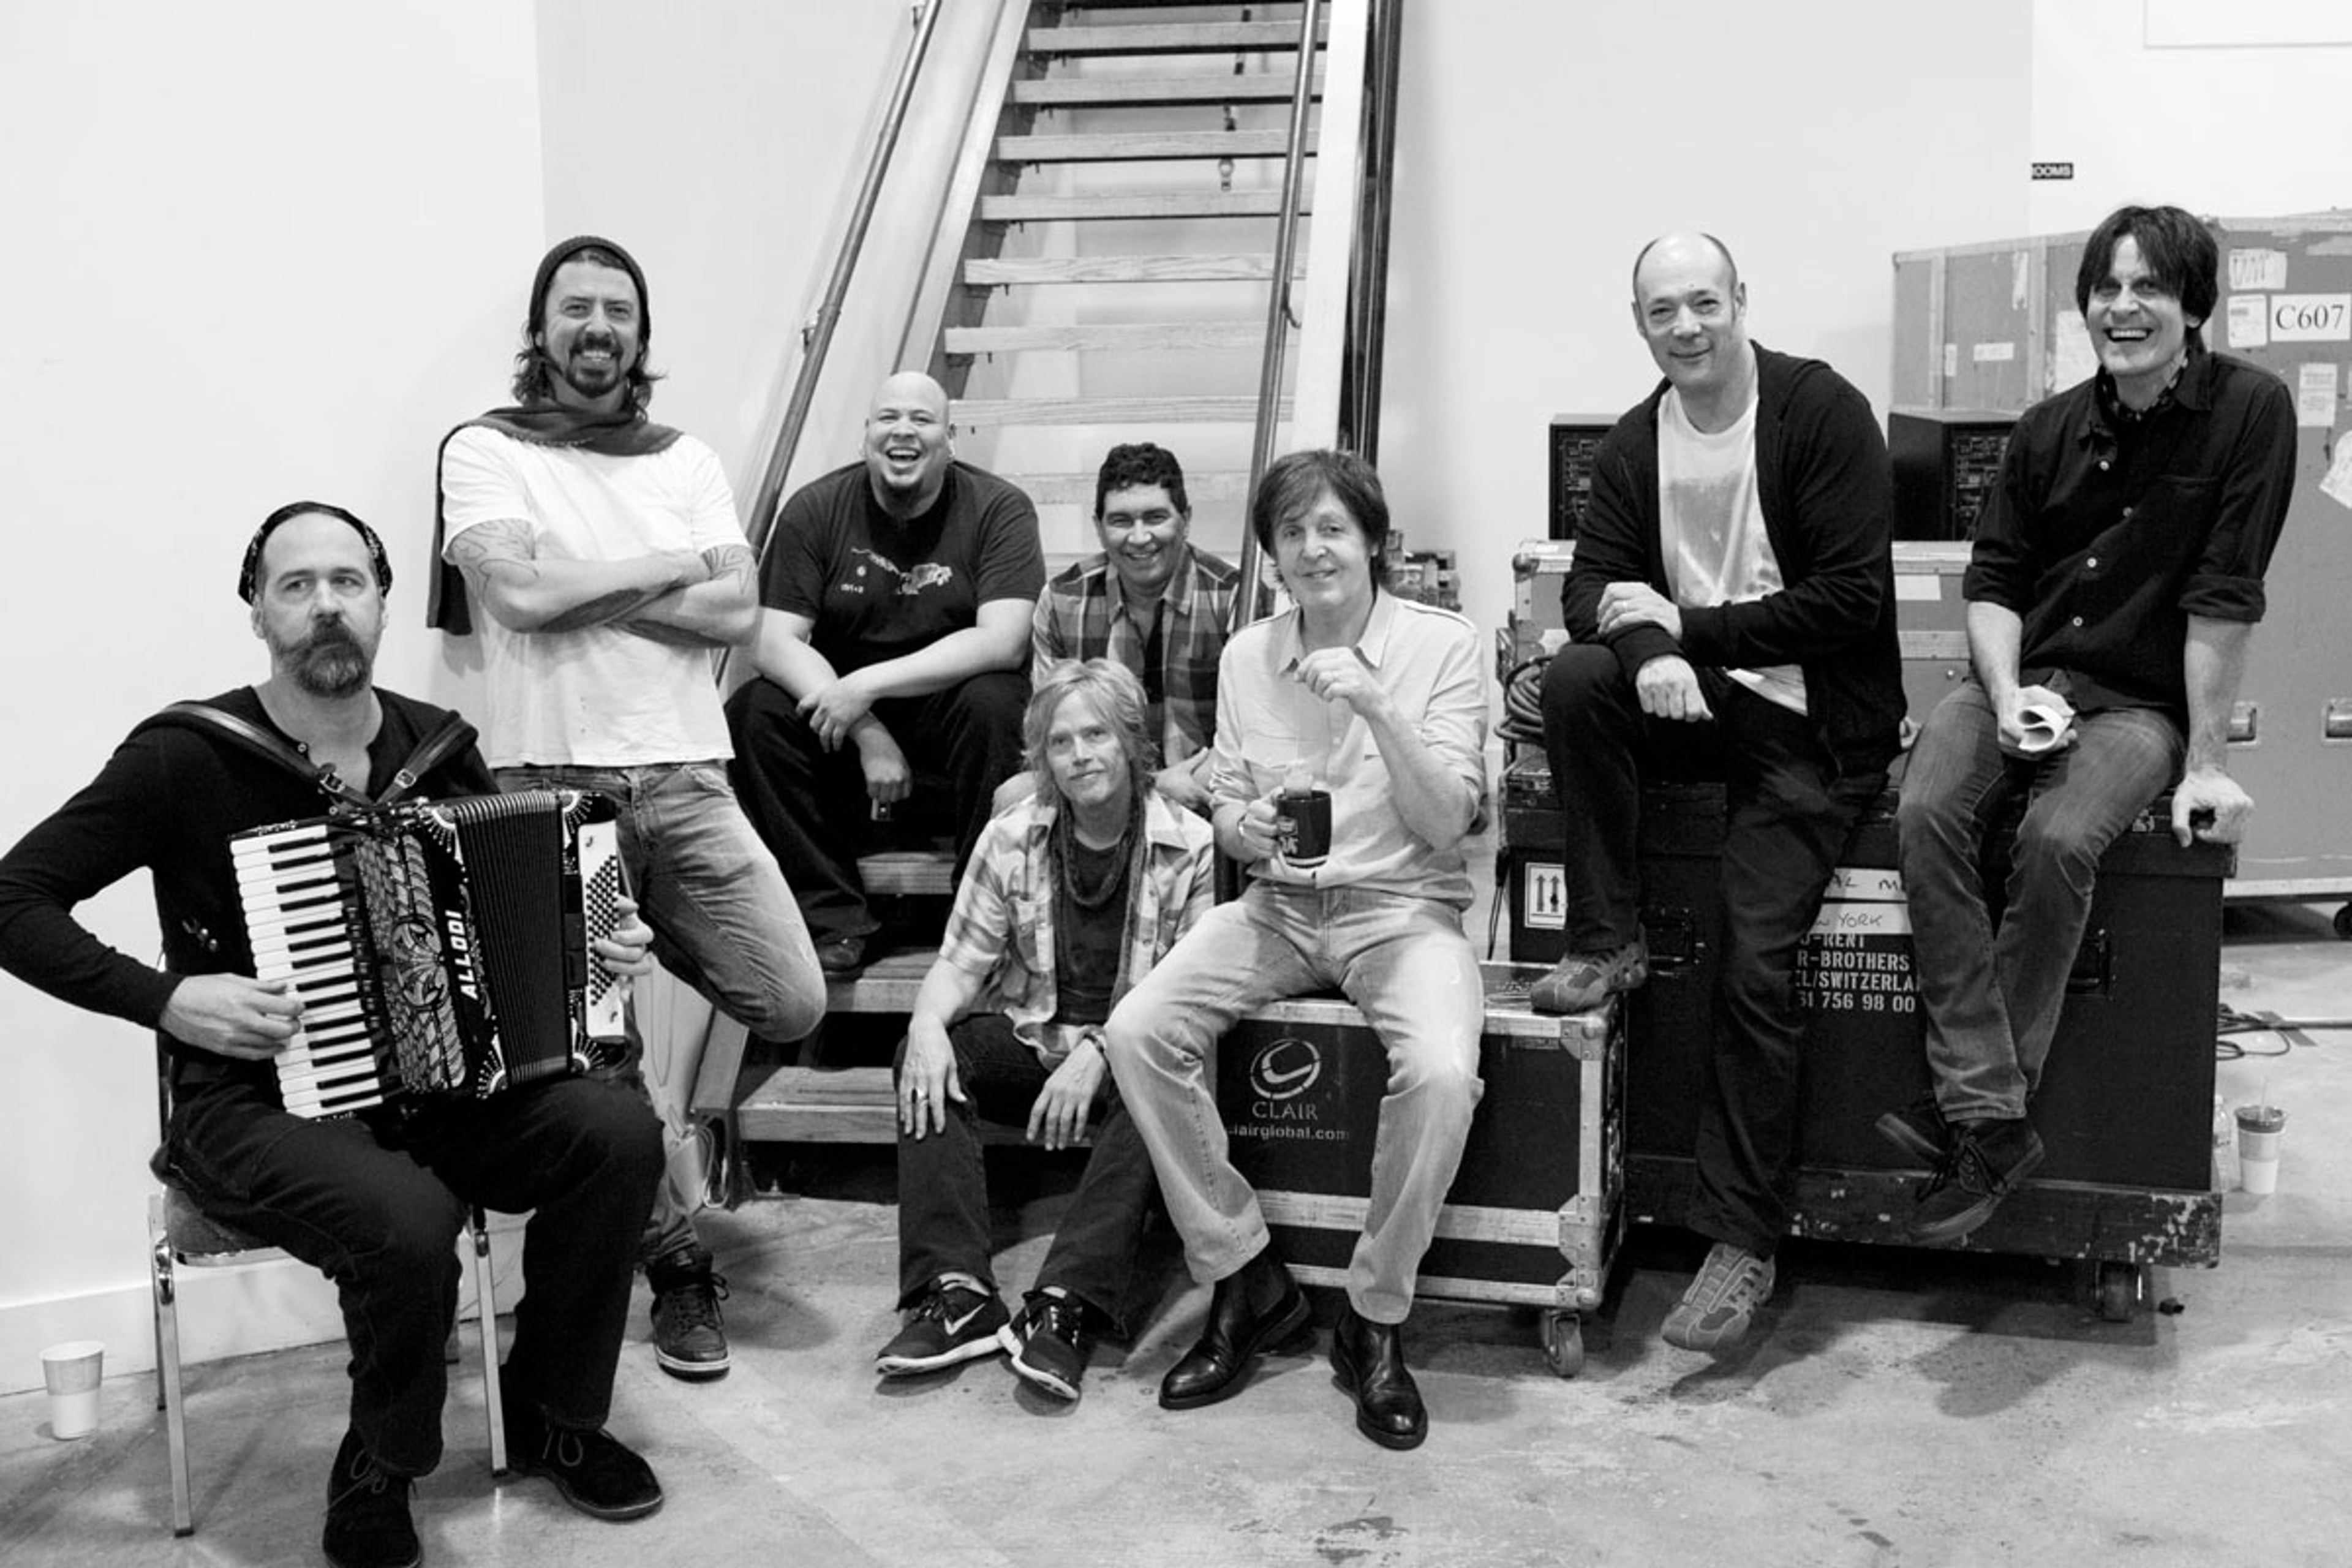 From l-r: Krist Novoselic, Dave Grohl, Abe, Brian, Pat Smear, Paul, Wix and Rusty at rehearsals, 12-12-12 Hurricane Sandy Benefit, Madison Square Garden, NYC, 10th December 2012